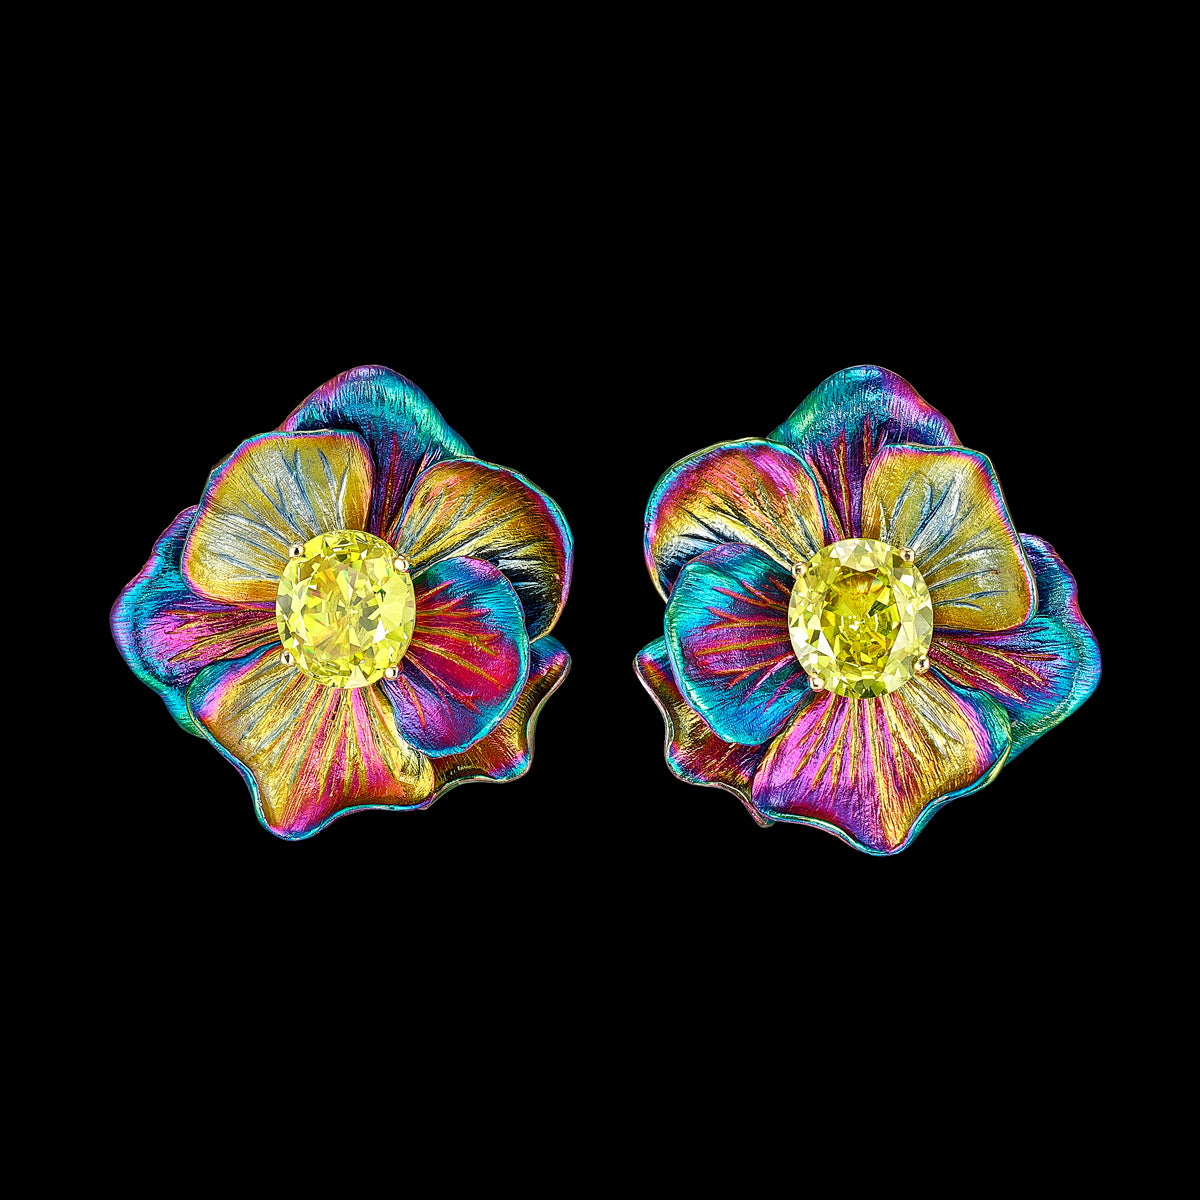 Rainbow Acid Bloom Earrings, Earrings, Anabela Chan Joaillerie - Fine jewelry with laboratory grown and created gemstones hand-crafted in the United Kingdom. Anabela Chan Joaillerie is the first fine jewellery brand in the world to champion laboratory-grown and created gemstones with high jewellery design, artisanal craftsmanship and a focus on ethical and sustainable innovations.